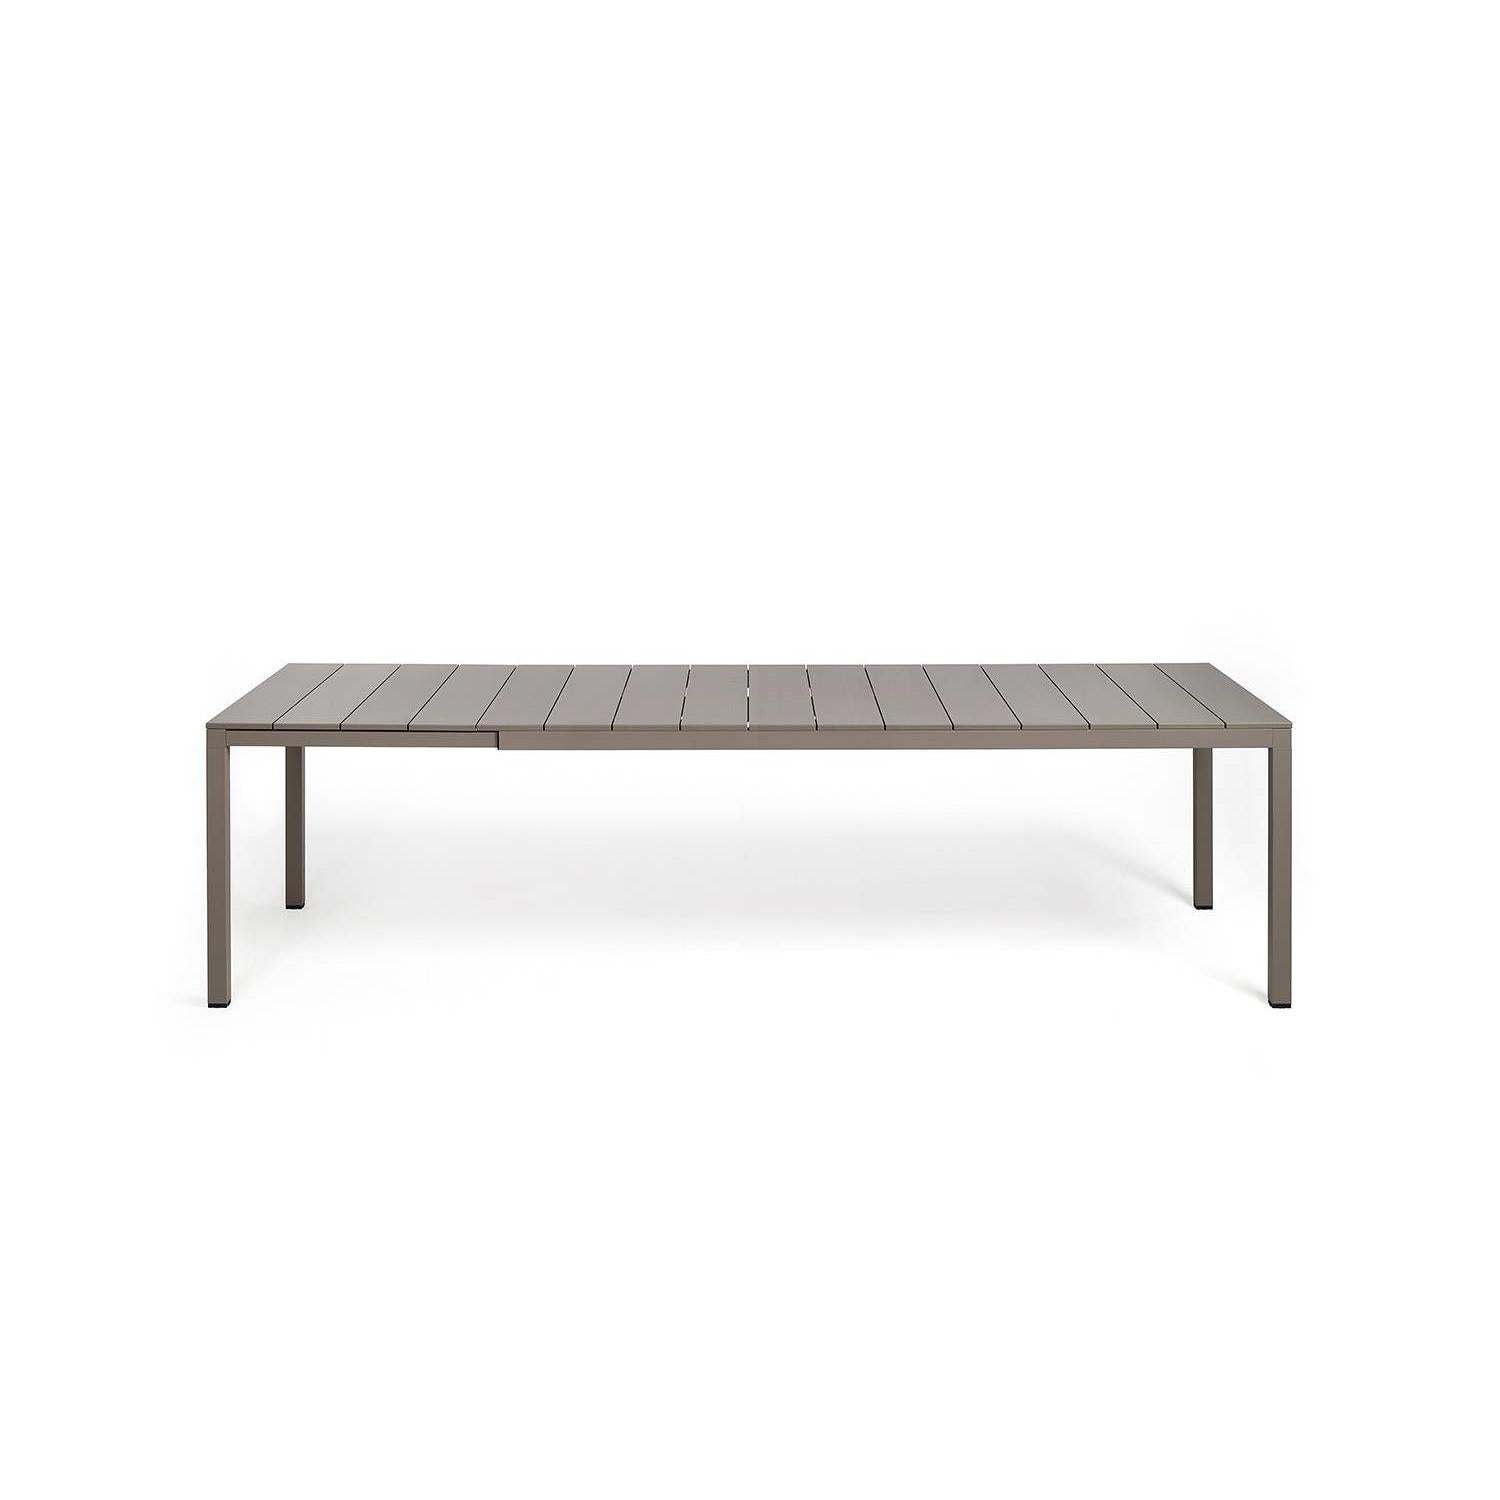 NARDI RIO ALU 210 Extendable Outdoor Dining Table [8-10 Seater]